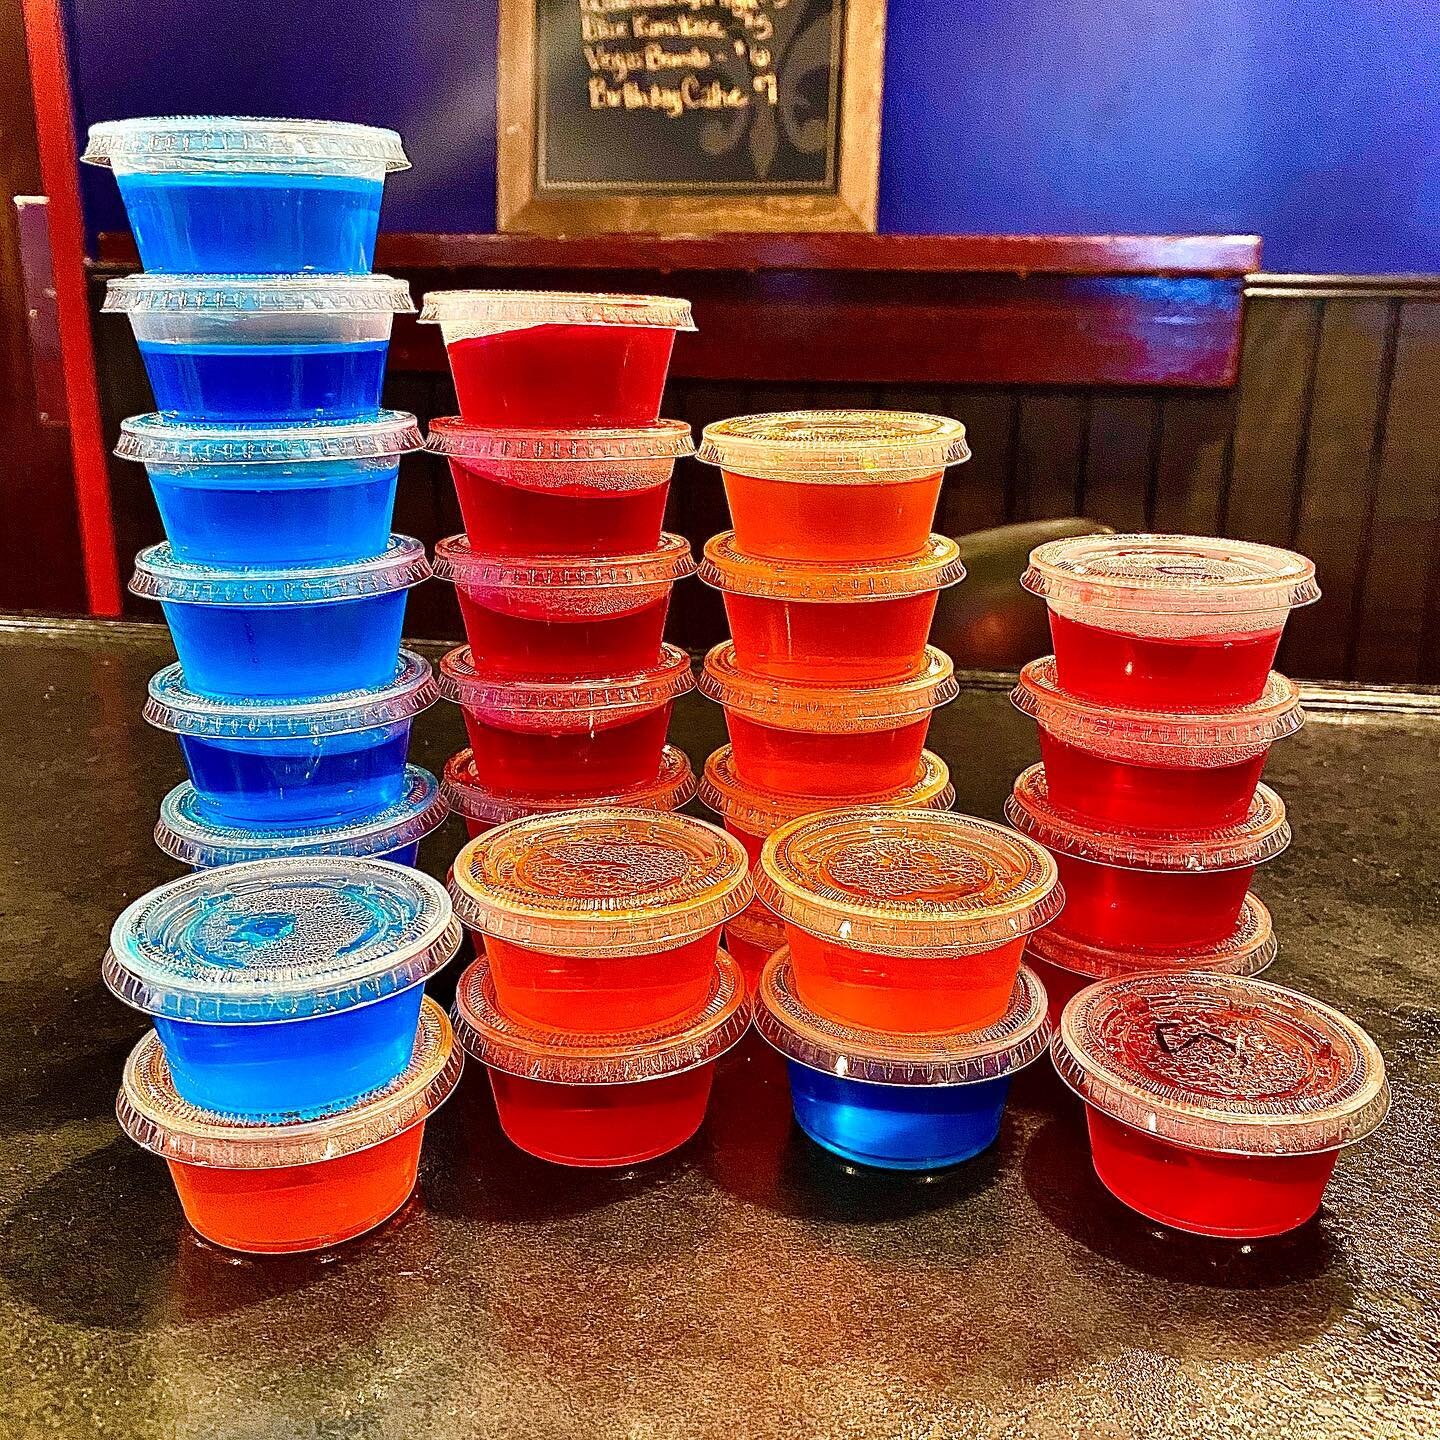 $1 Jell-O shots!! Come load up 😎 While quantities last #jelloshots